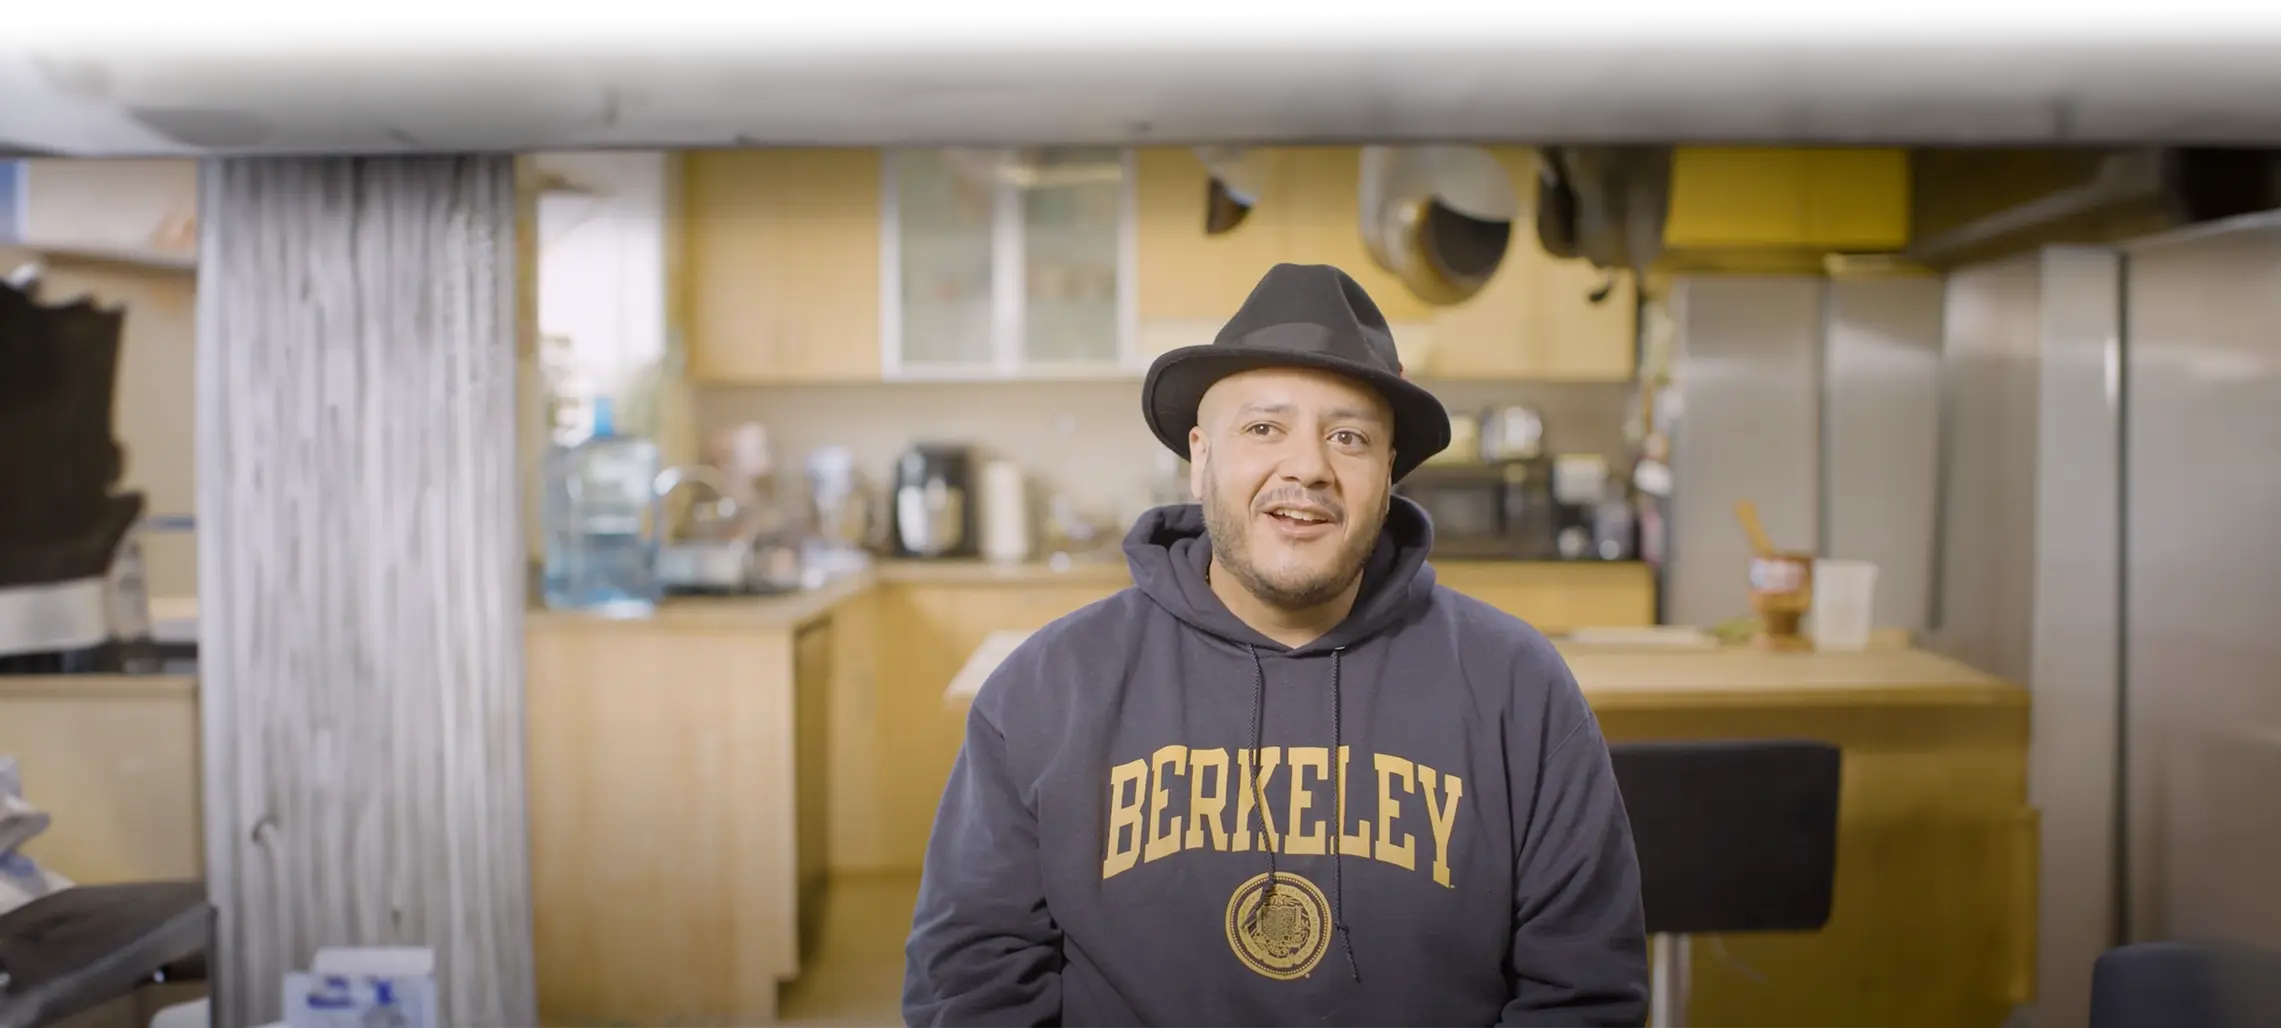 A male presenting individual with a fedora and a sweatshirt with the words 'Berkeley' on it.